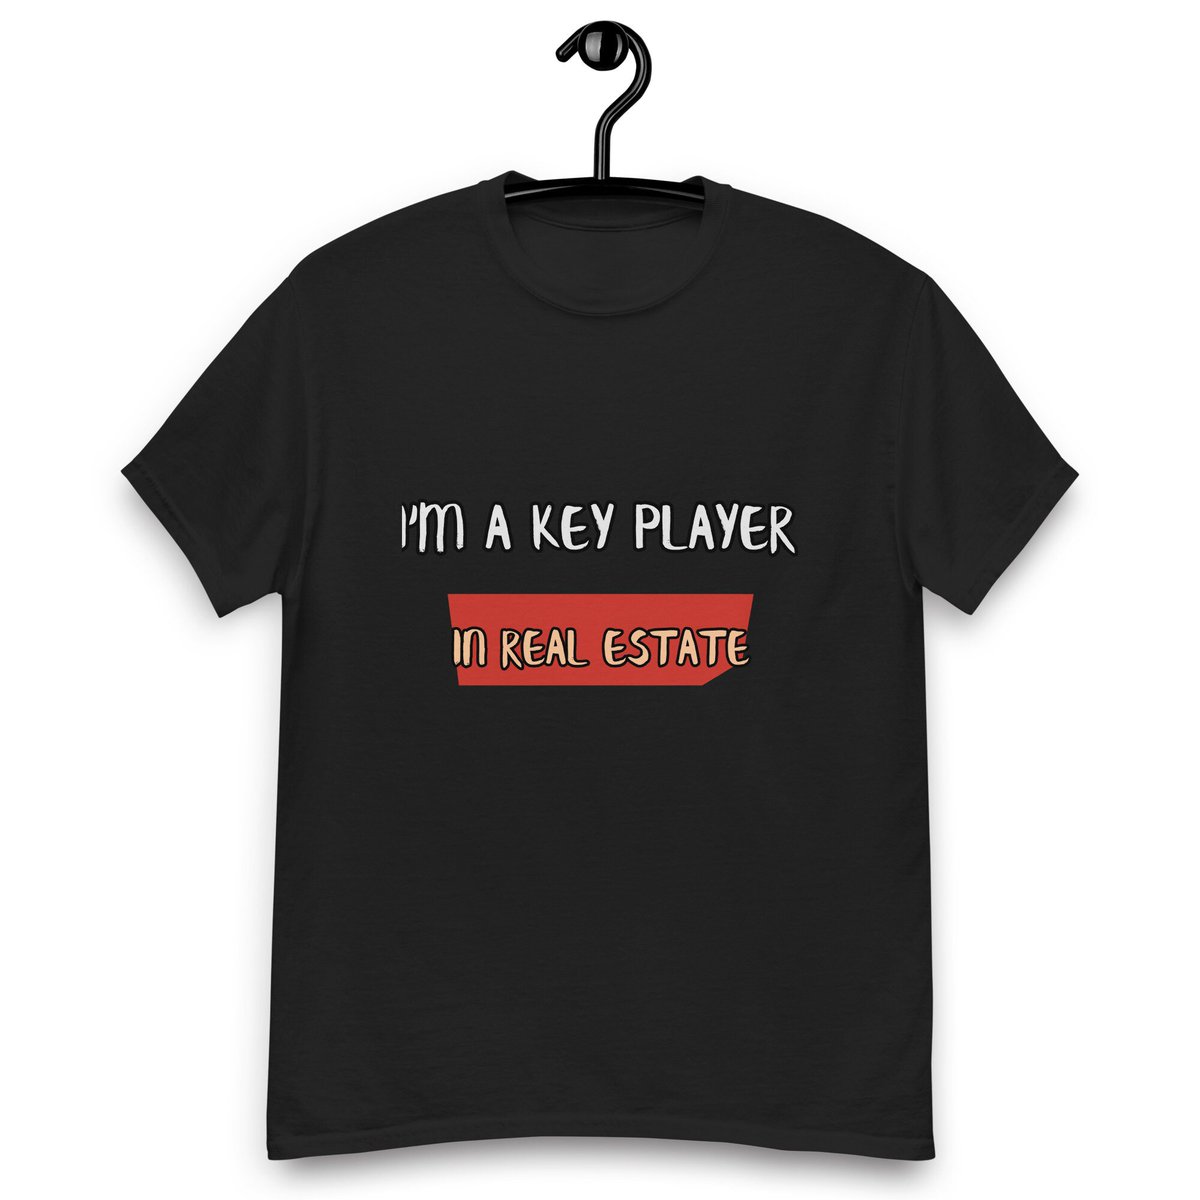 Excited to share the latest addition to my #etsy shop: I'm a Key Player in Real Estate T-shirt for Realtors, Gift for Real Estate Agent, Gift For Realtor, Realtor Gift, etsy.me/3q8OQPk #shortsleeve #realtorgift #realestateagent #brokergift #RealtorShirt